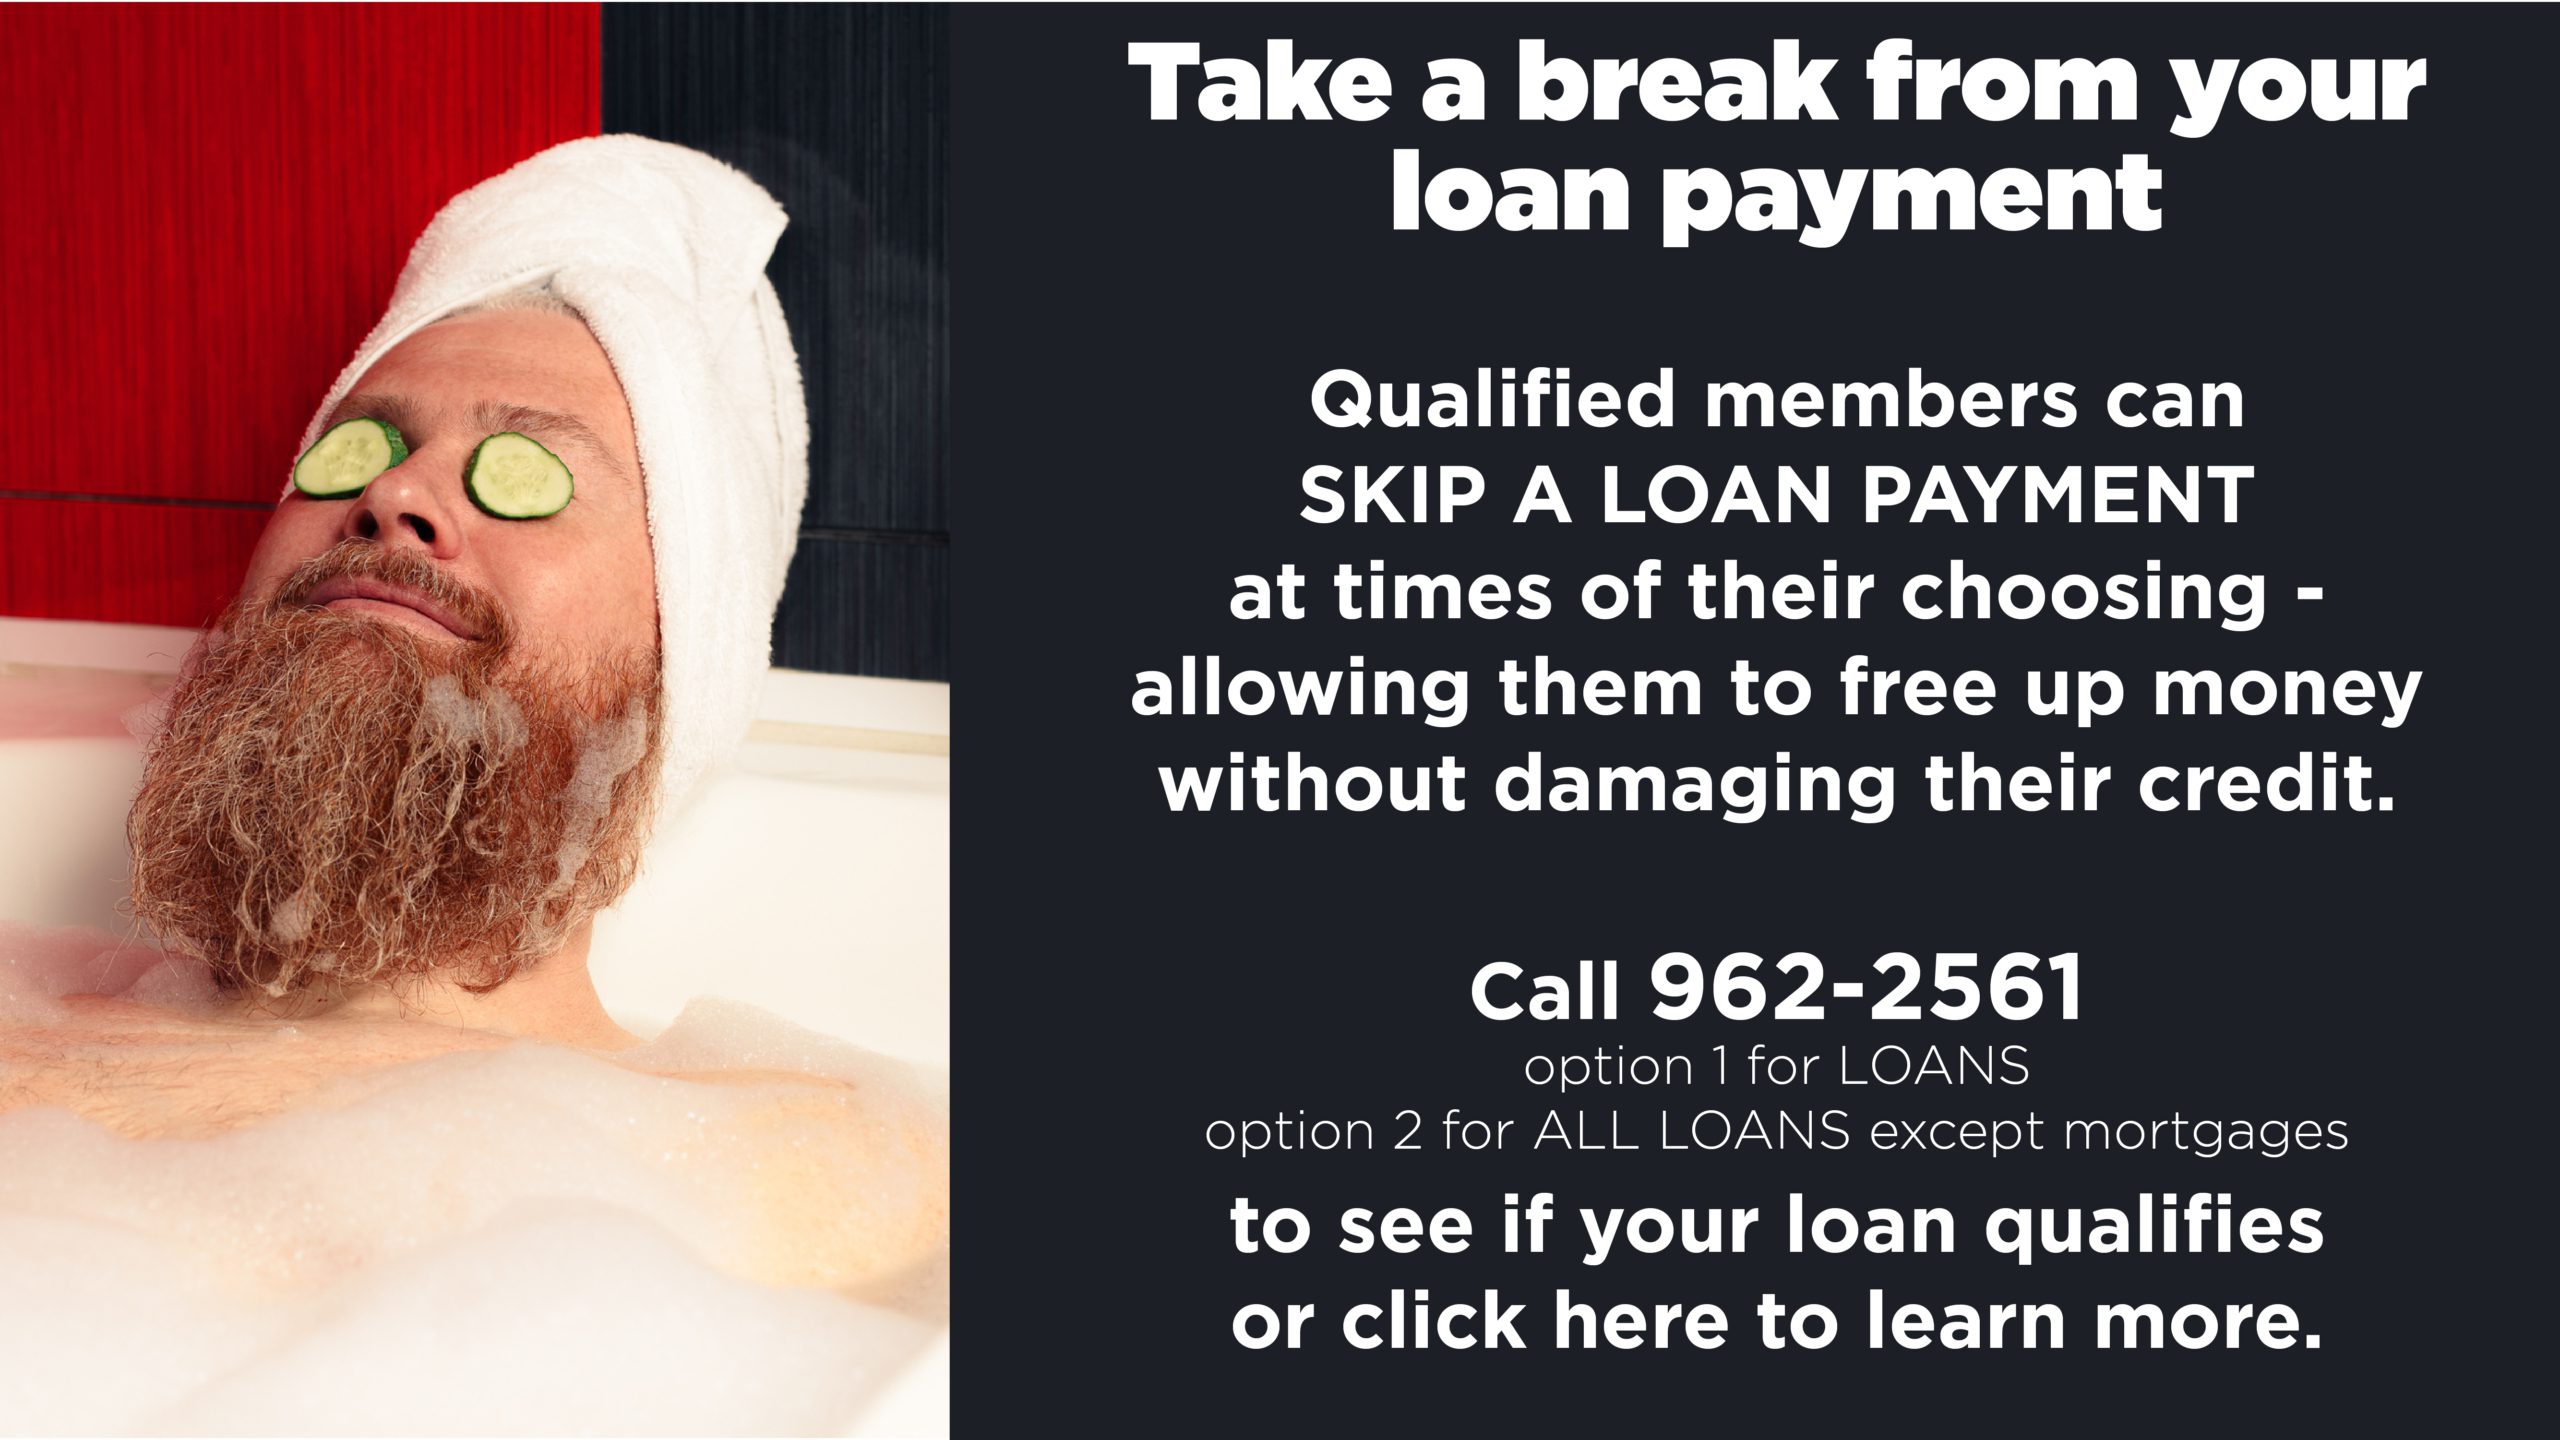 take a break from your loan payment.